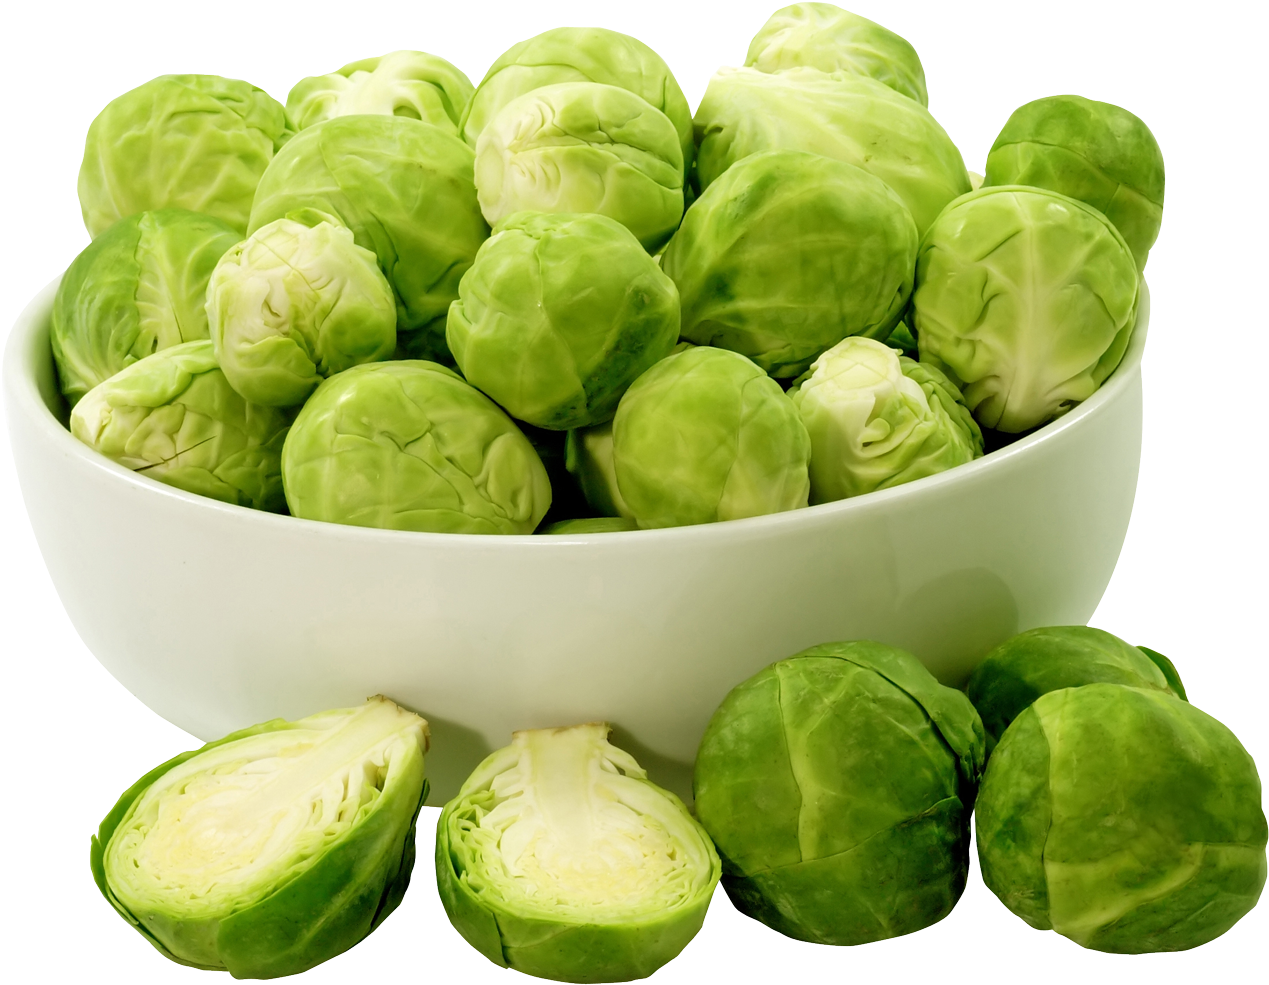 A Bowl Of Brussels Sprouts